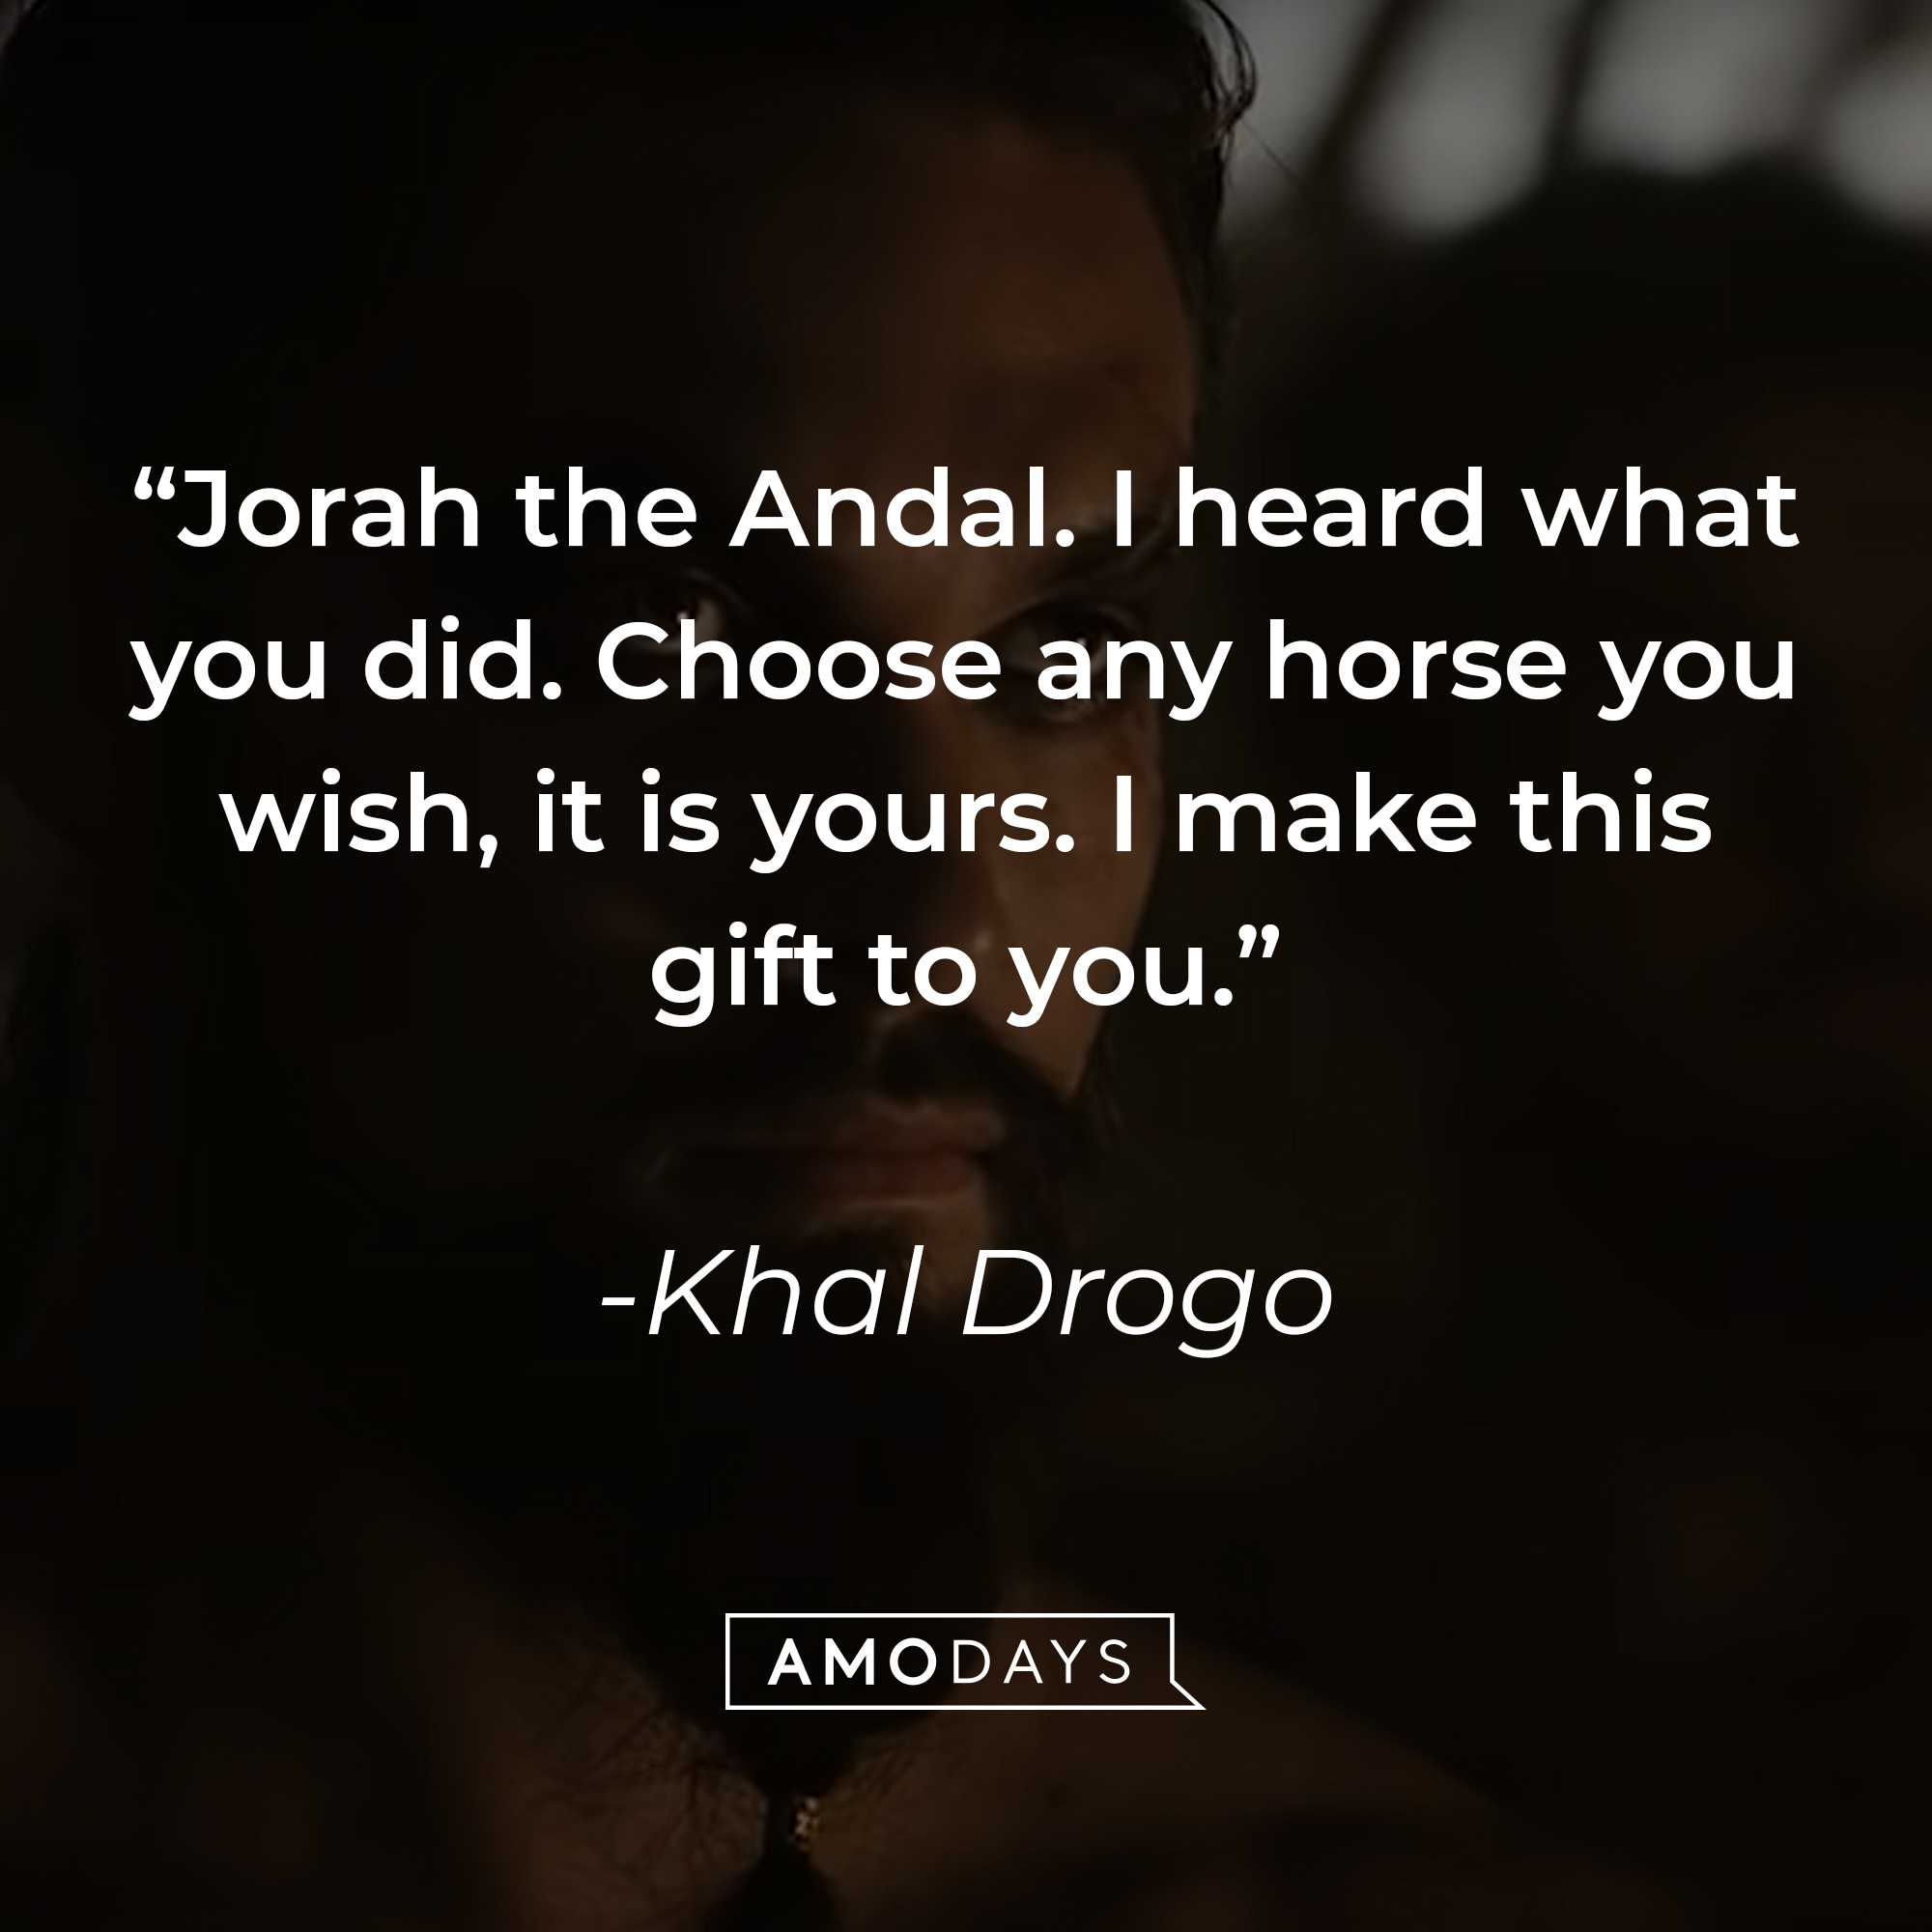 Khal Drogo's quote: "Jorah the Andal. I heard what you did. Choose any horse you wish, it is yours. I make this gift to you."  | Source: youtube.com/gameofthrones